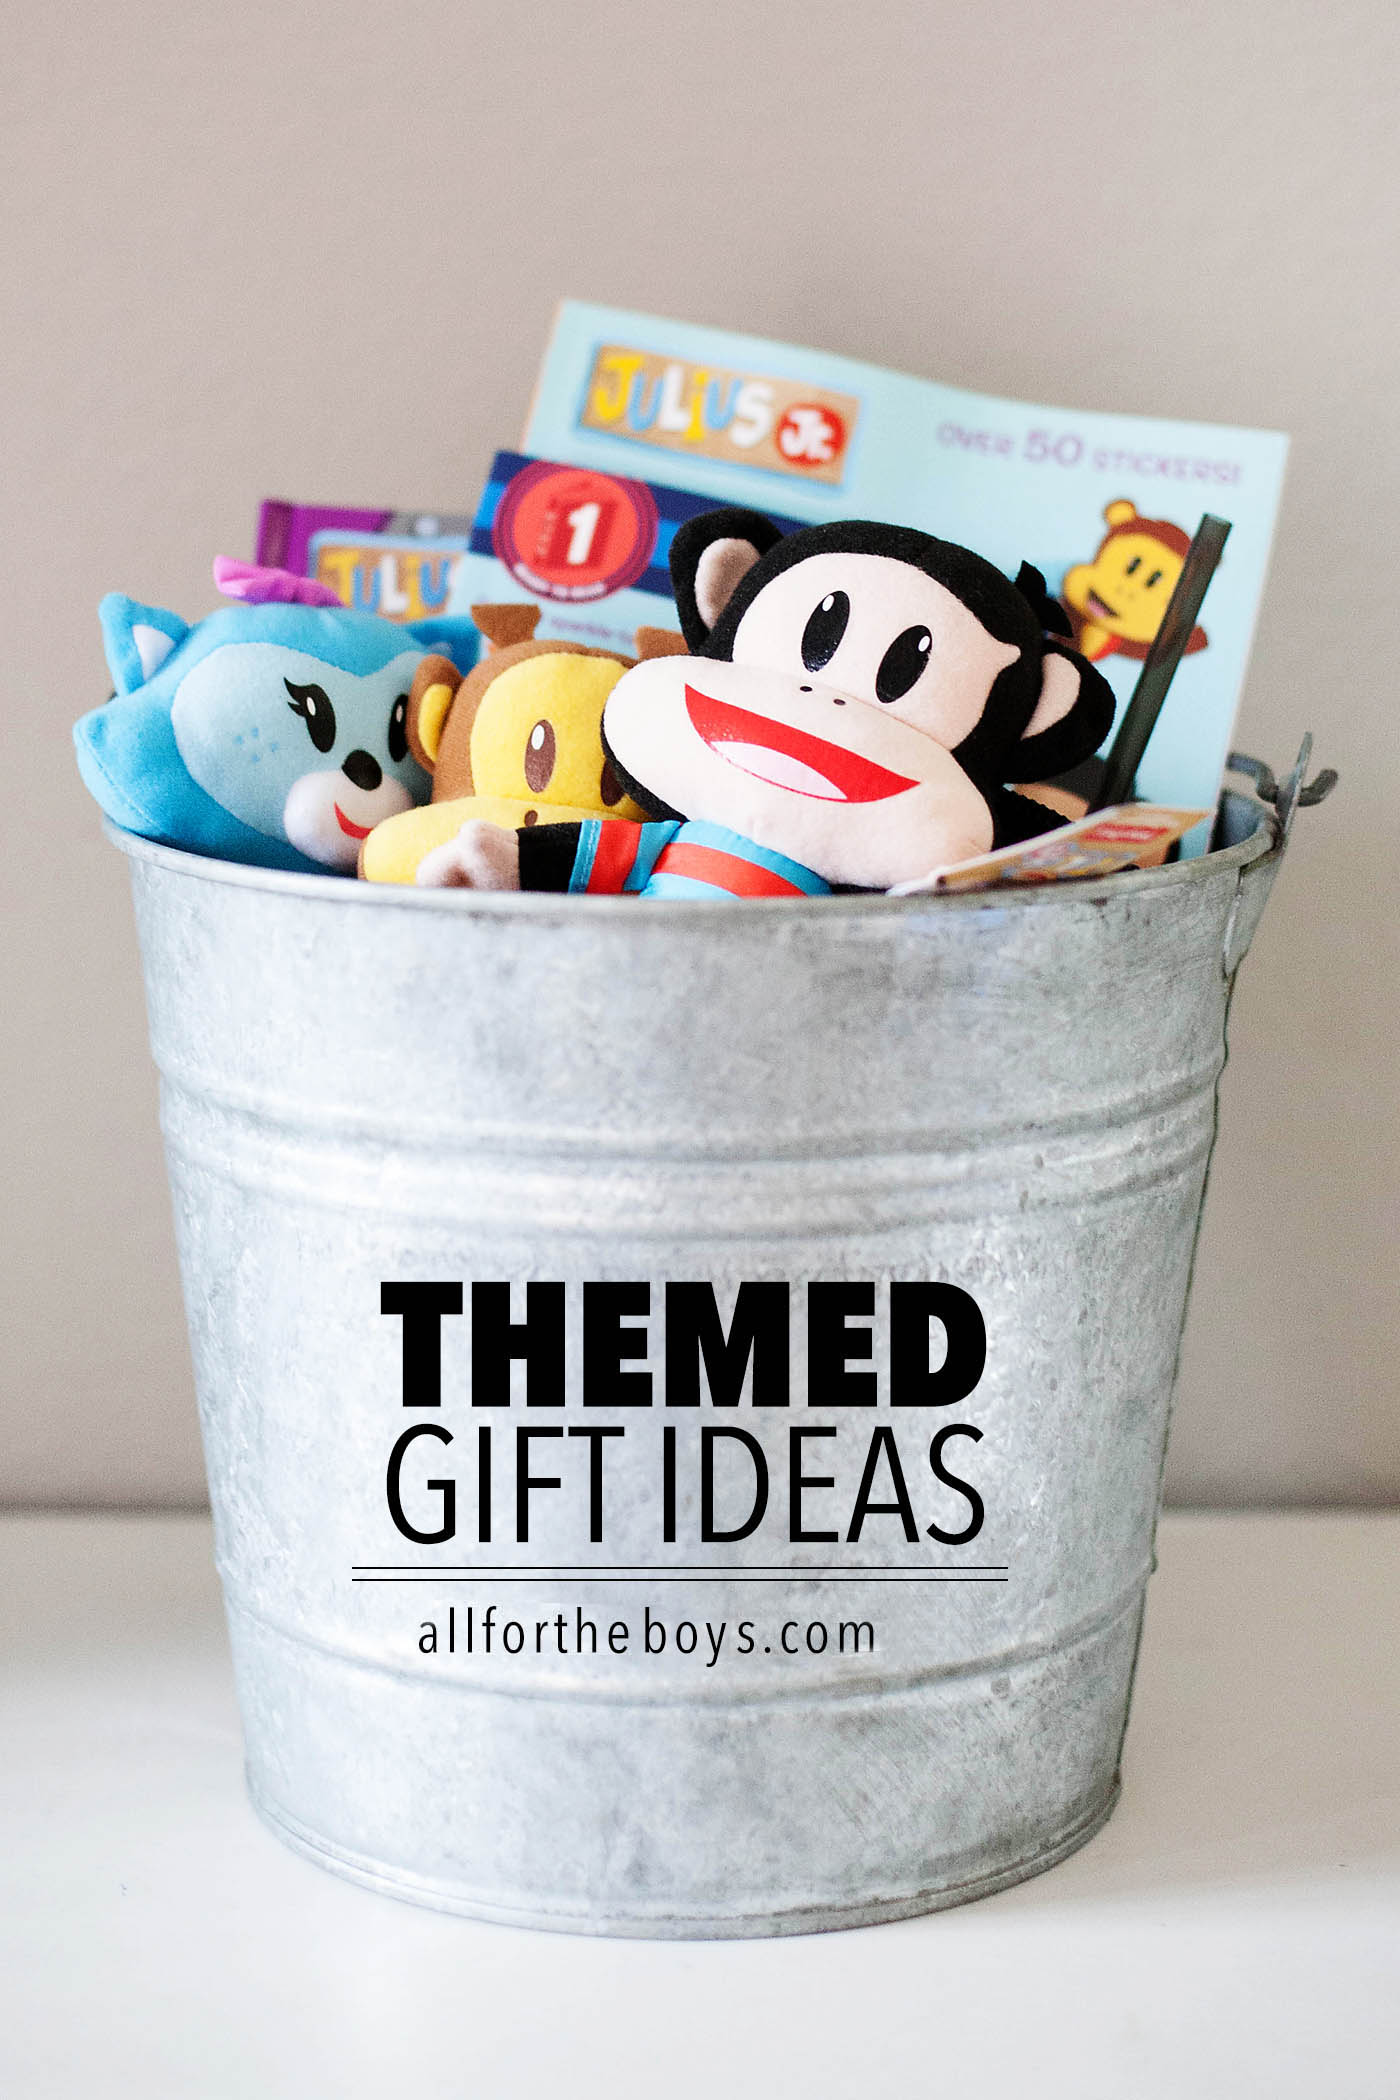 Gift Ideas for Families with Kids - The Joys of Boys